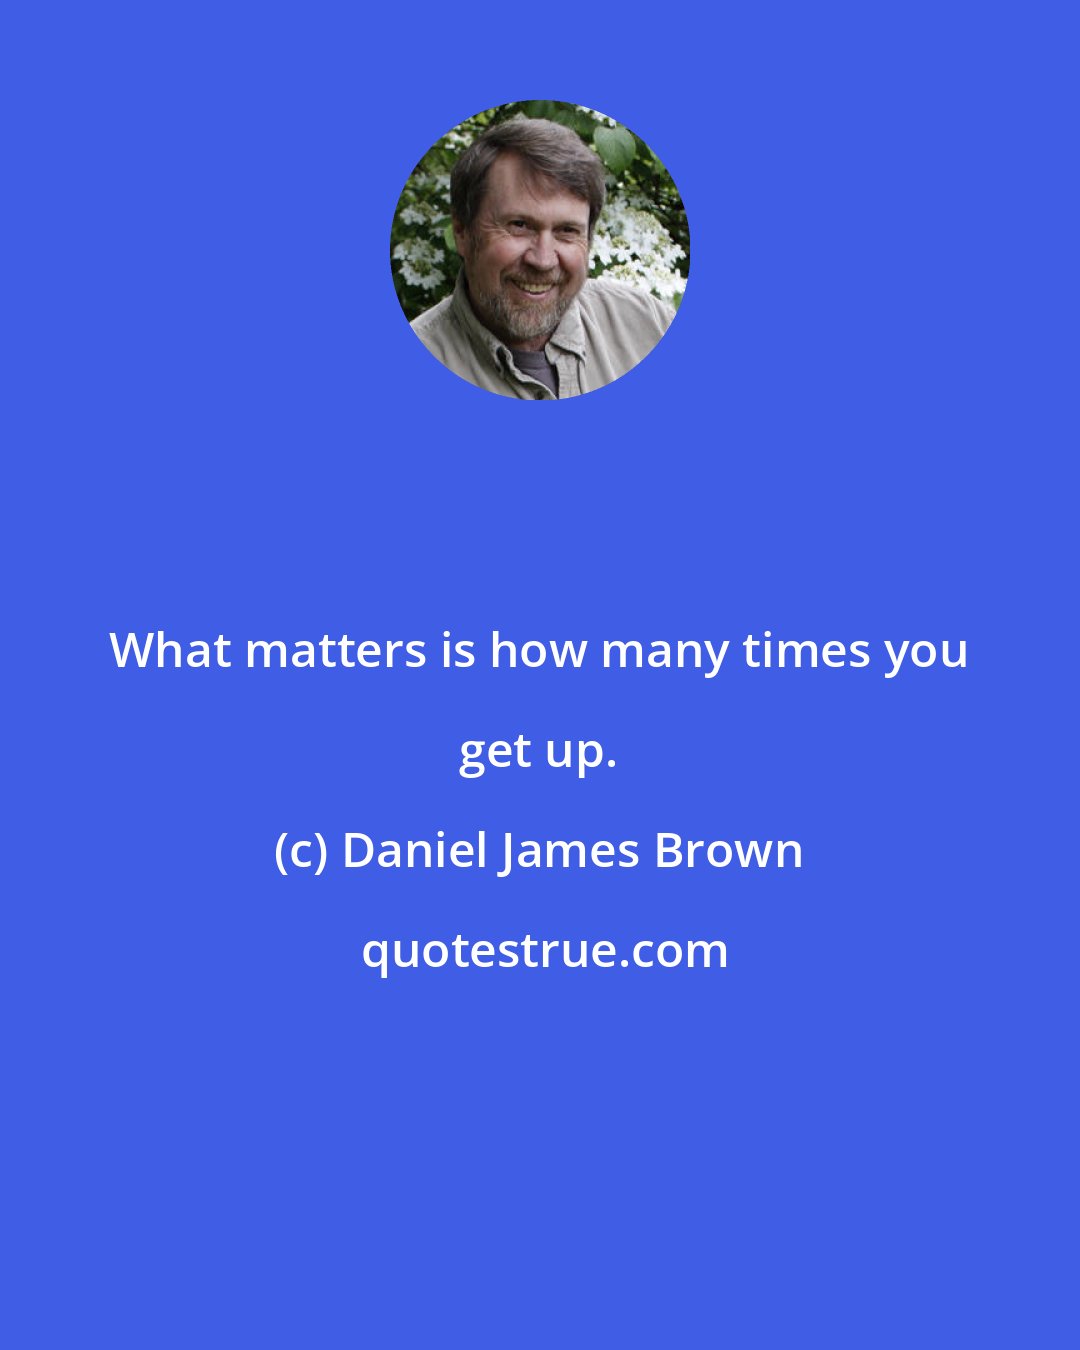 Daniel James Brown: What matters is how many times you get up.